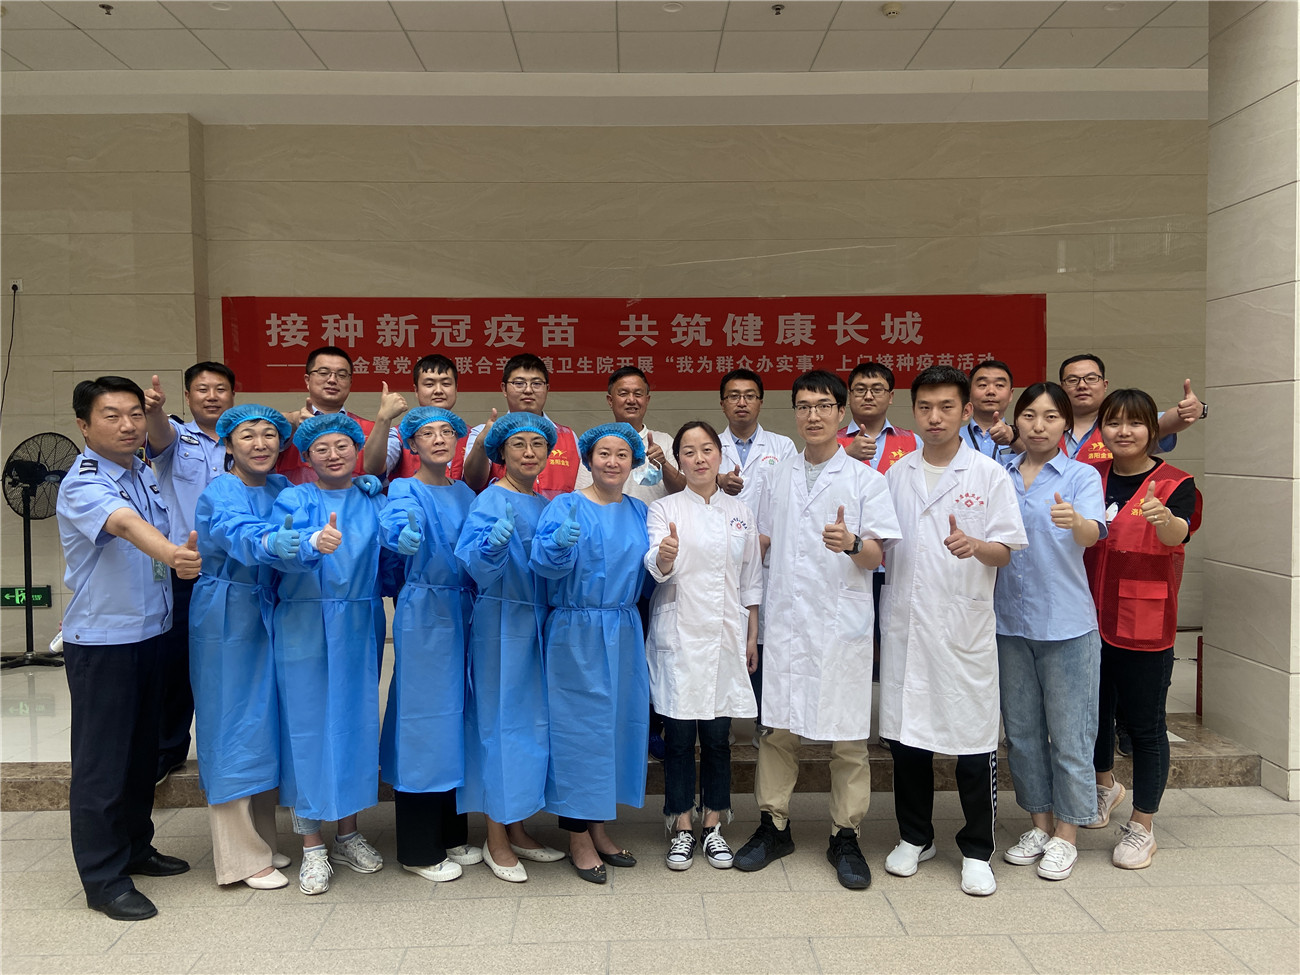 Inoculate the new crown vaccine to build a healthy Great Wall-Luoyang Jinlu Party General Branch and Xindian Town Health Center launch "I do practical things for the masses" door-to-door vaccination campaign